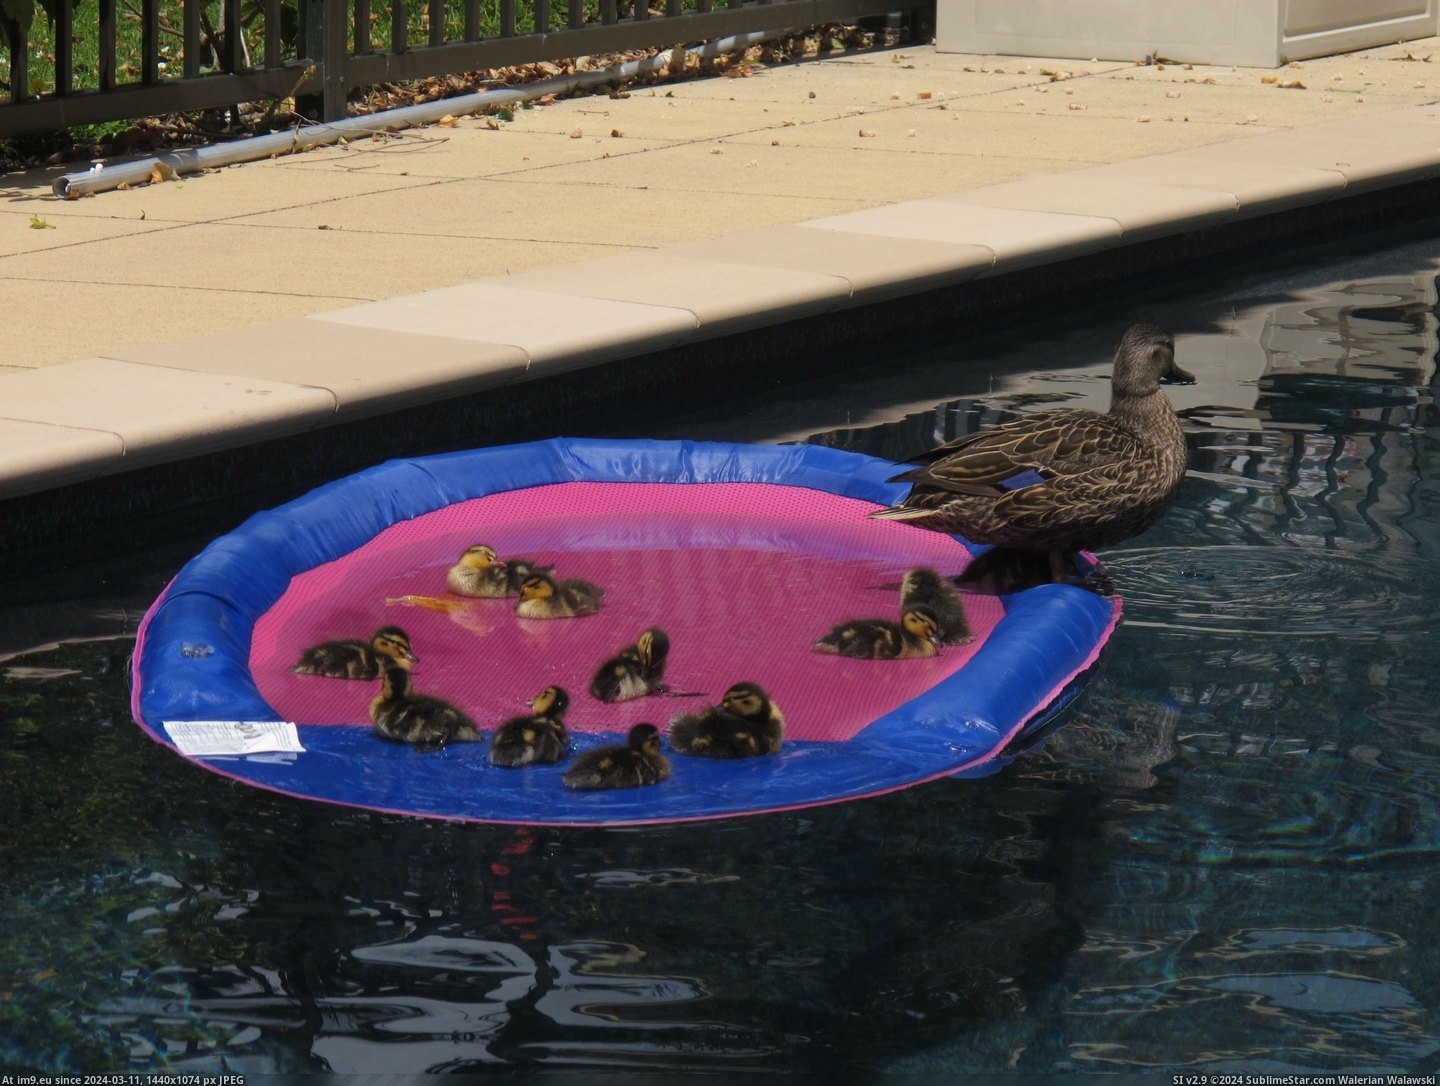 #Life #Out #Pool #Raft #Ducklings #Our #Too #Jump [Aww] We found ducklings in our pool. Were too little to jump out, so we sent in a life raft. Pic. (Изображение из альбом My r/AWW favs))